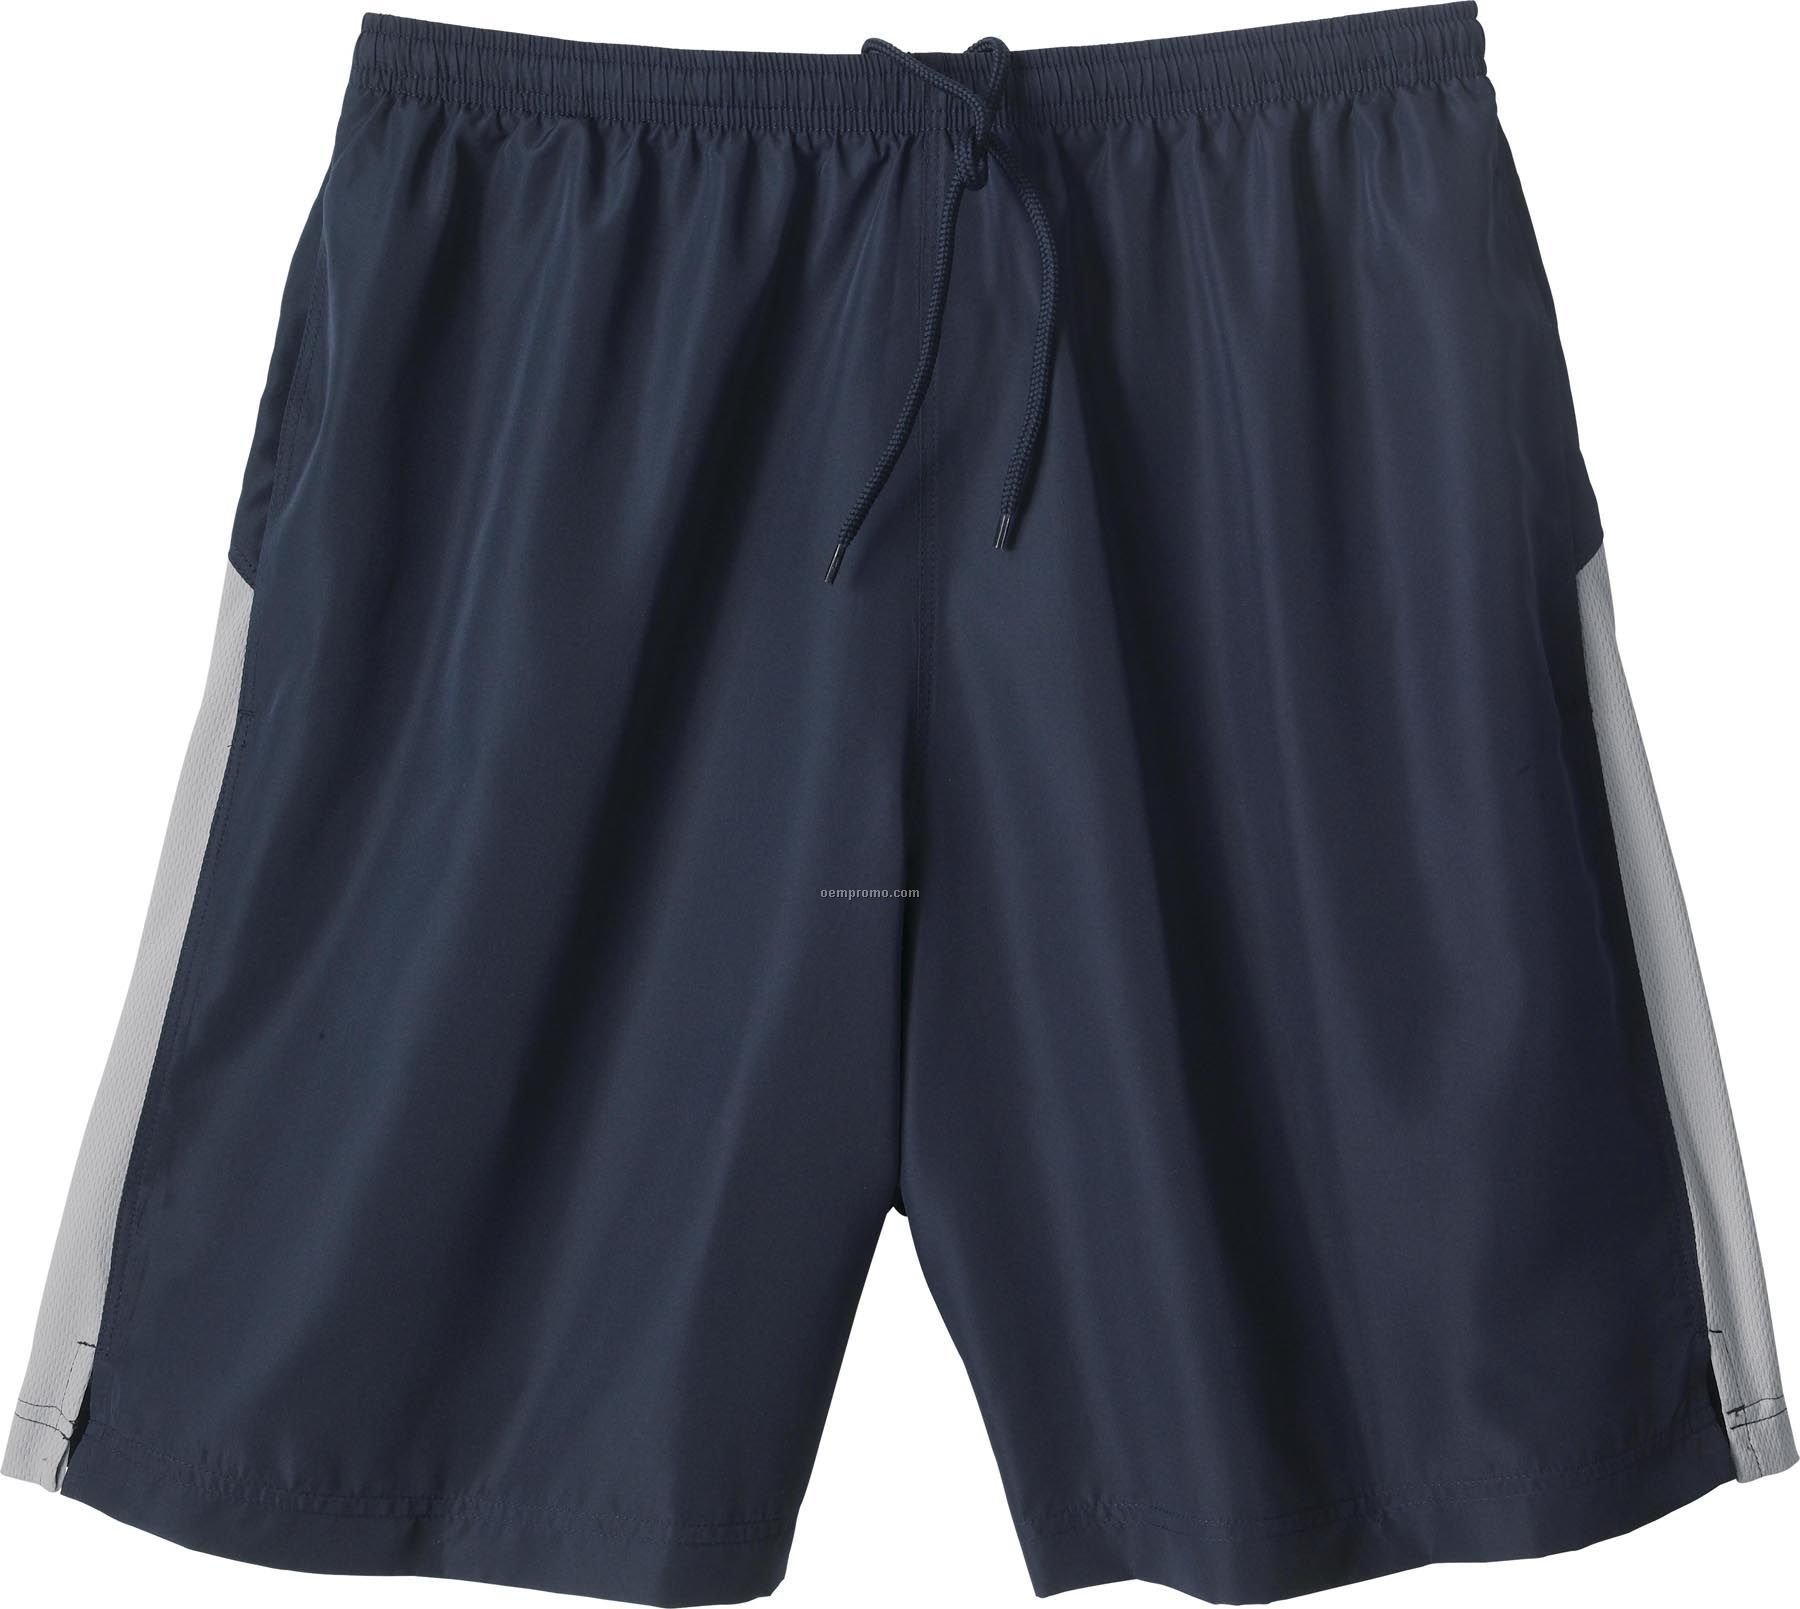 Men's North End Athletic Shorts